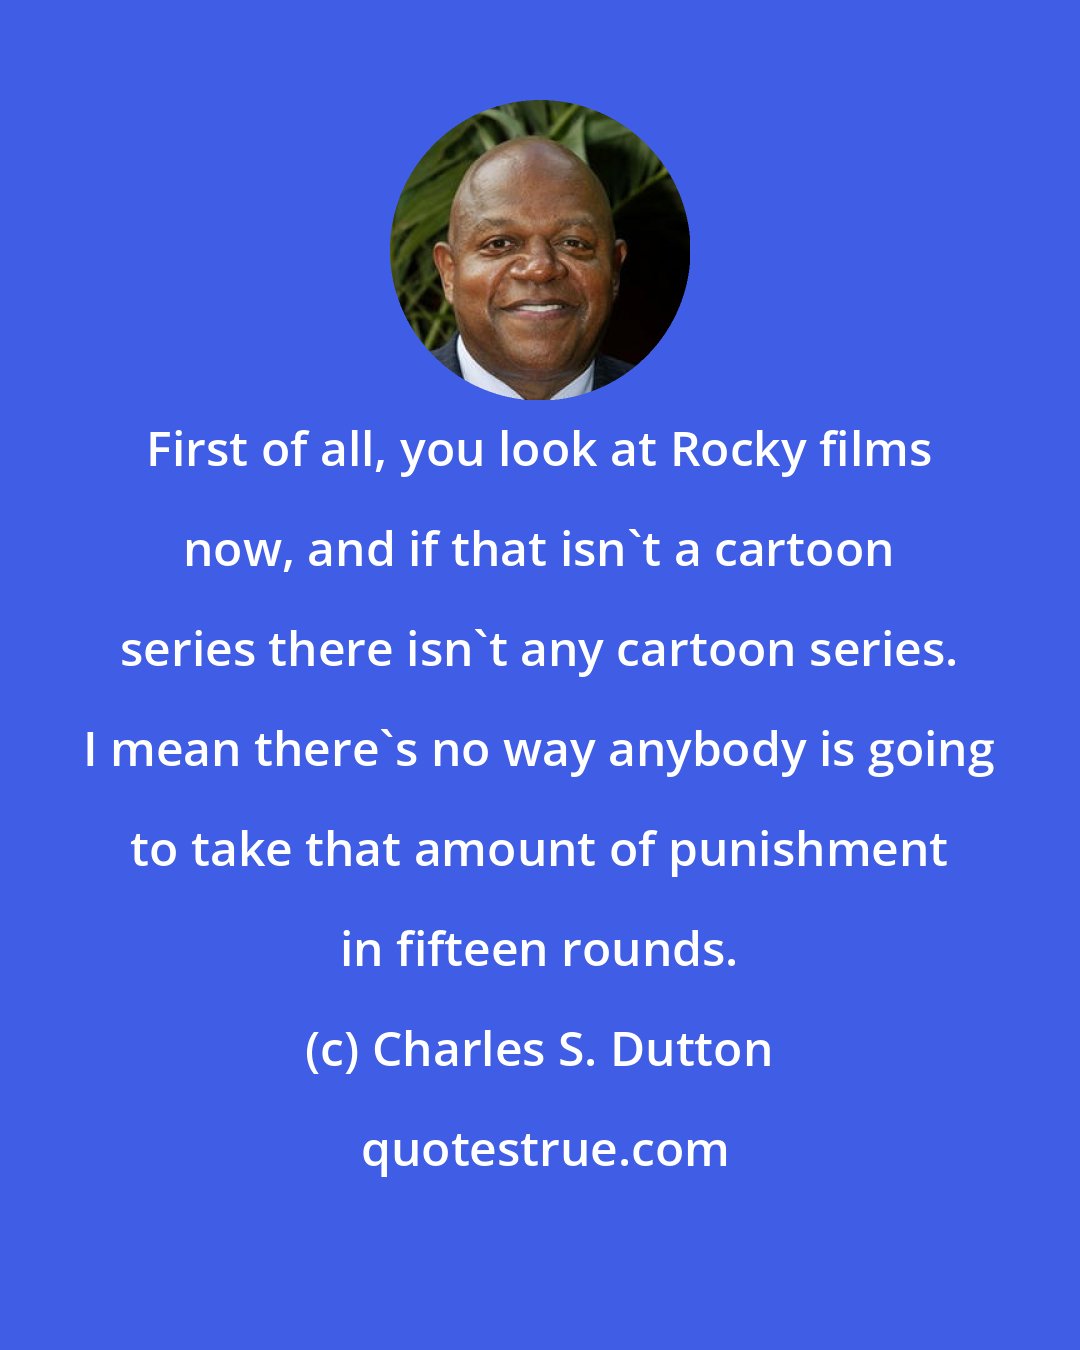 Charles S. Dutton: First of all, you look at Rocky films now, and if that isn't a cartoon series there isn't any cartoon series. I mean there's no way anybody is going to take that amount of punishment in fifteen rounds.